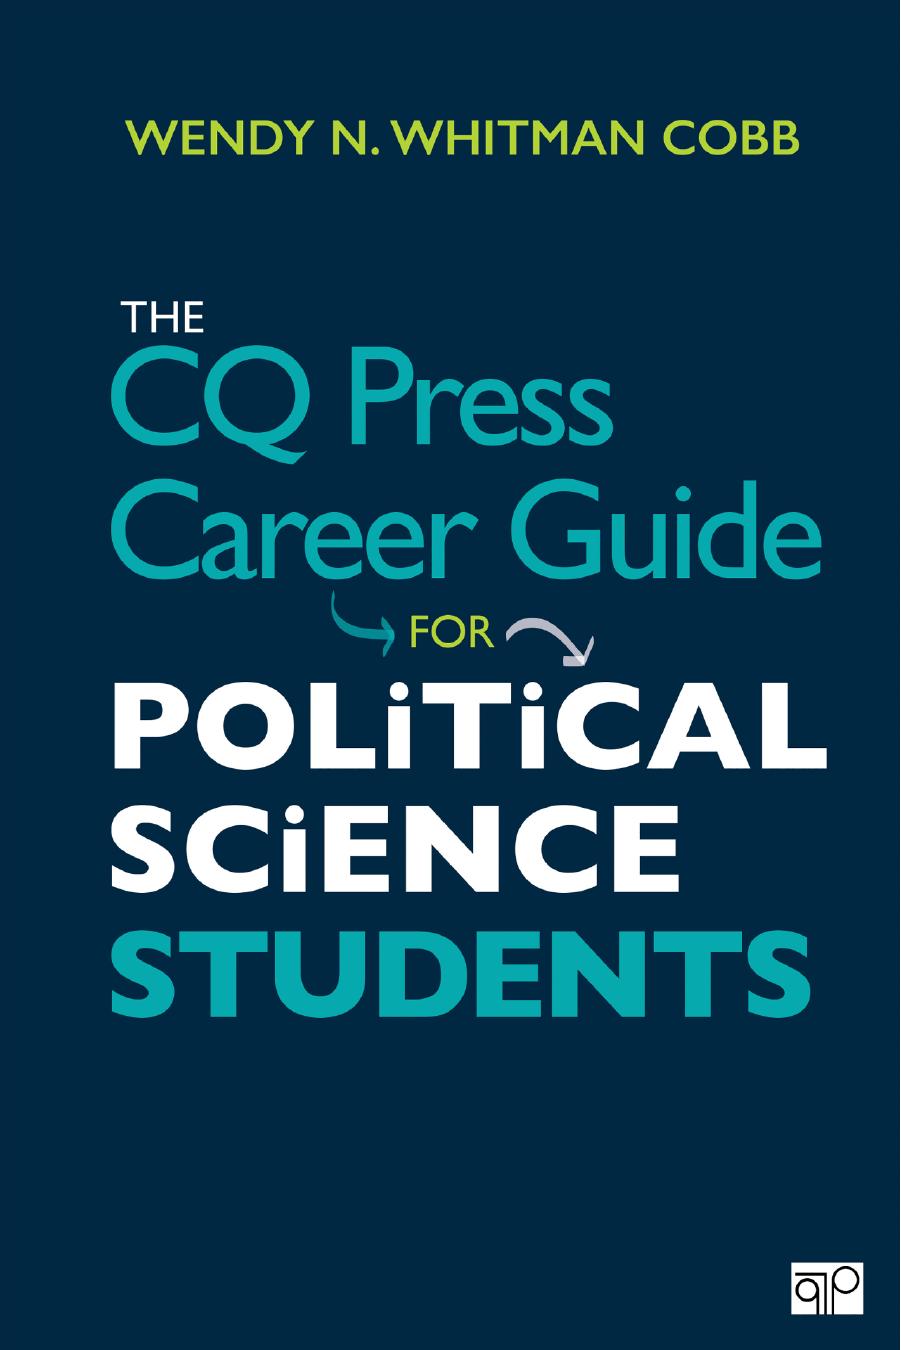 The CQ Press Career Guide for Political Science Students by Wendy N. Whitman Cobb